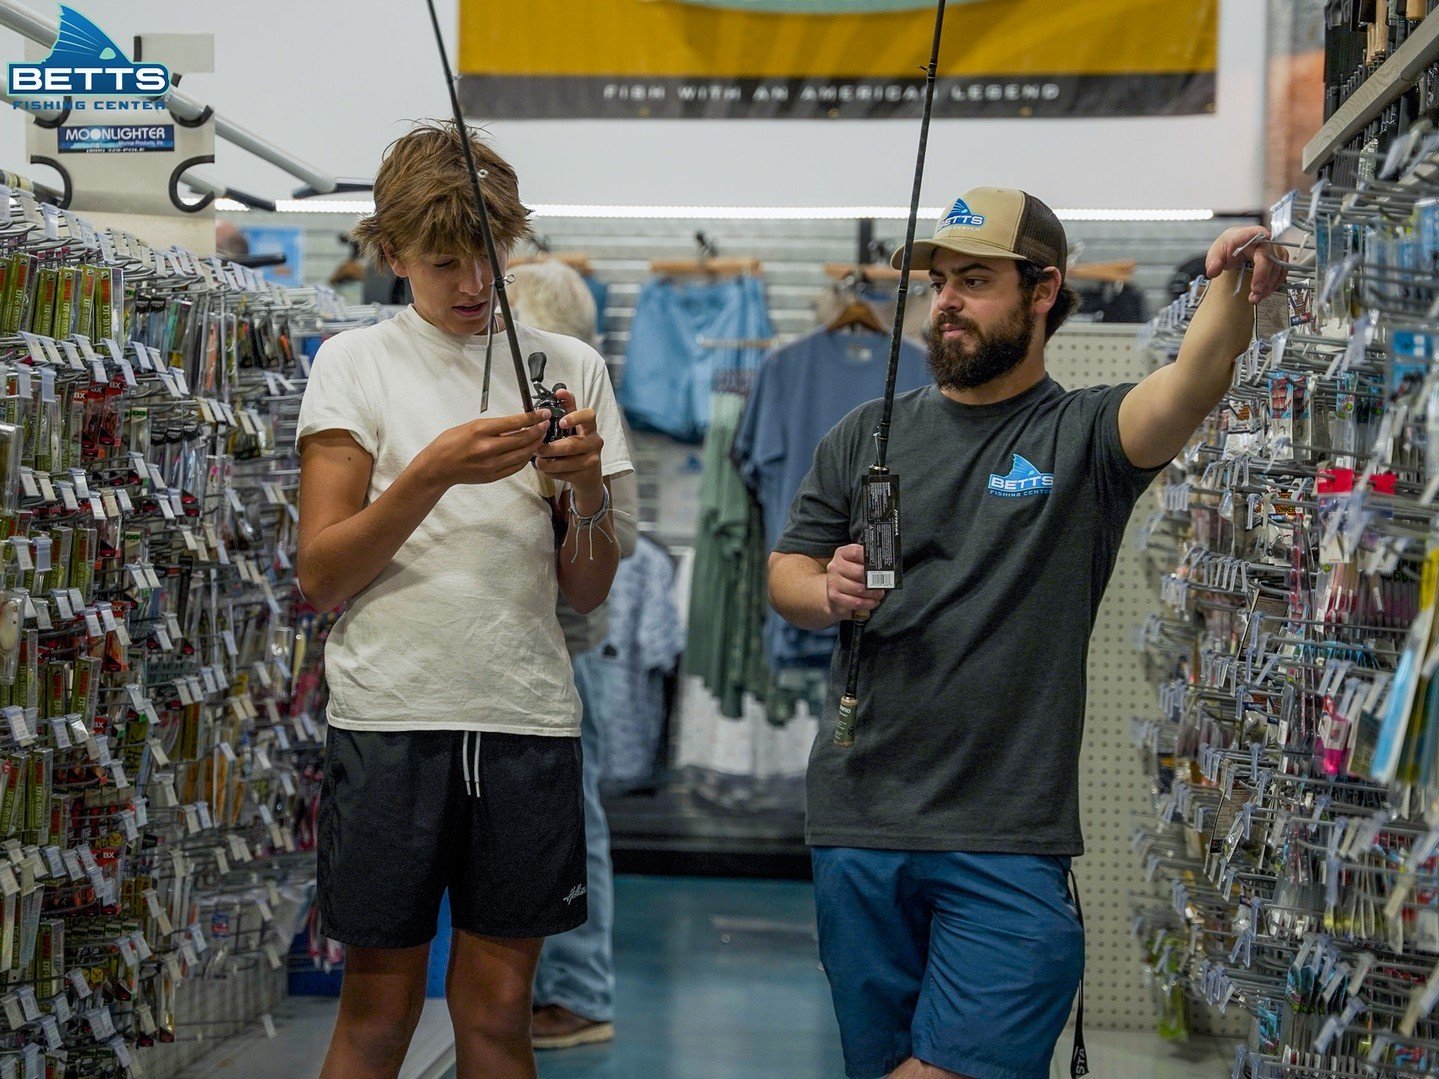 We want to help you find that perfect rod and reel combo that you have been looking for! Stop by Betts Fishing Center and talk to one of our experienced team members today!

#saltwaterfishing #fishing #fishinglife #fish #catchandrelease #saltlife #fi